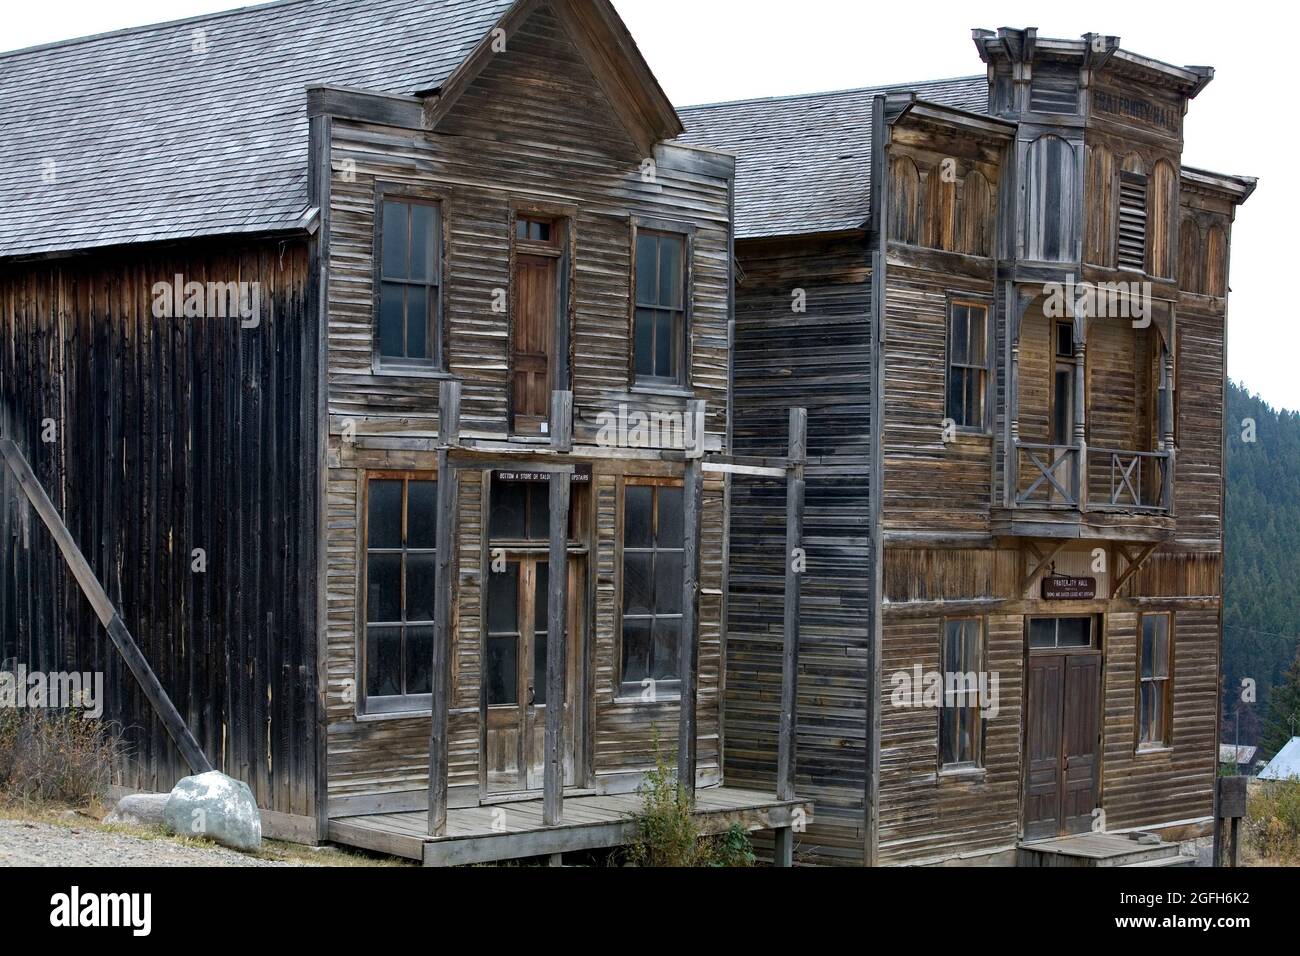 Gillian and Fraternity Halls, the only public buildings in  the ghost town of Elkhorn.  Elkhorn State Park, MT. Stock Photo